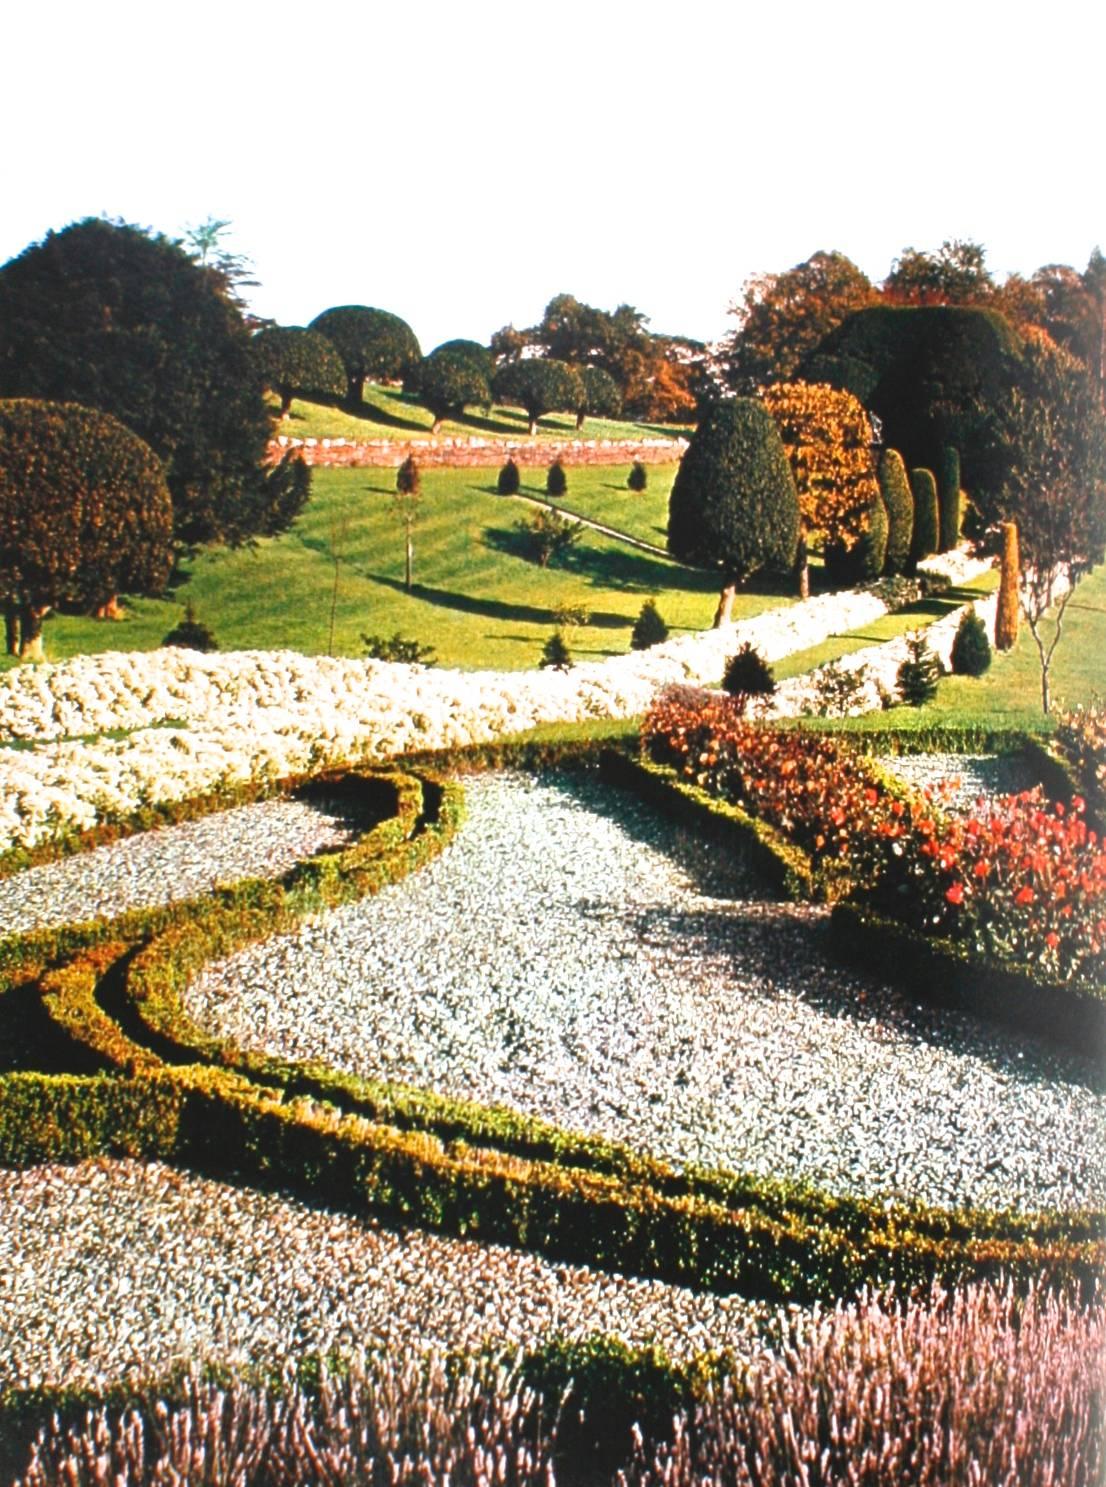 Great Gardens of Britain by Peter Coats. London: Spring Books, 1970. Hardcover with dust jacket. 287 pp. A handsome book on the diversity and quality of British gardens. The book showcases thirty-eight great gardens including natural gardens, wild